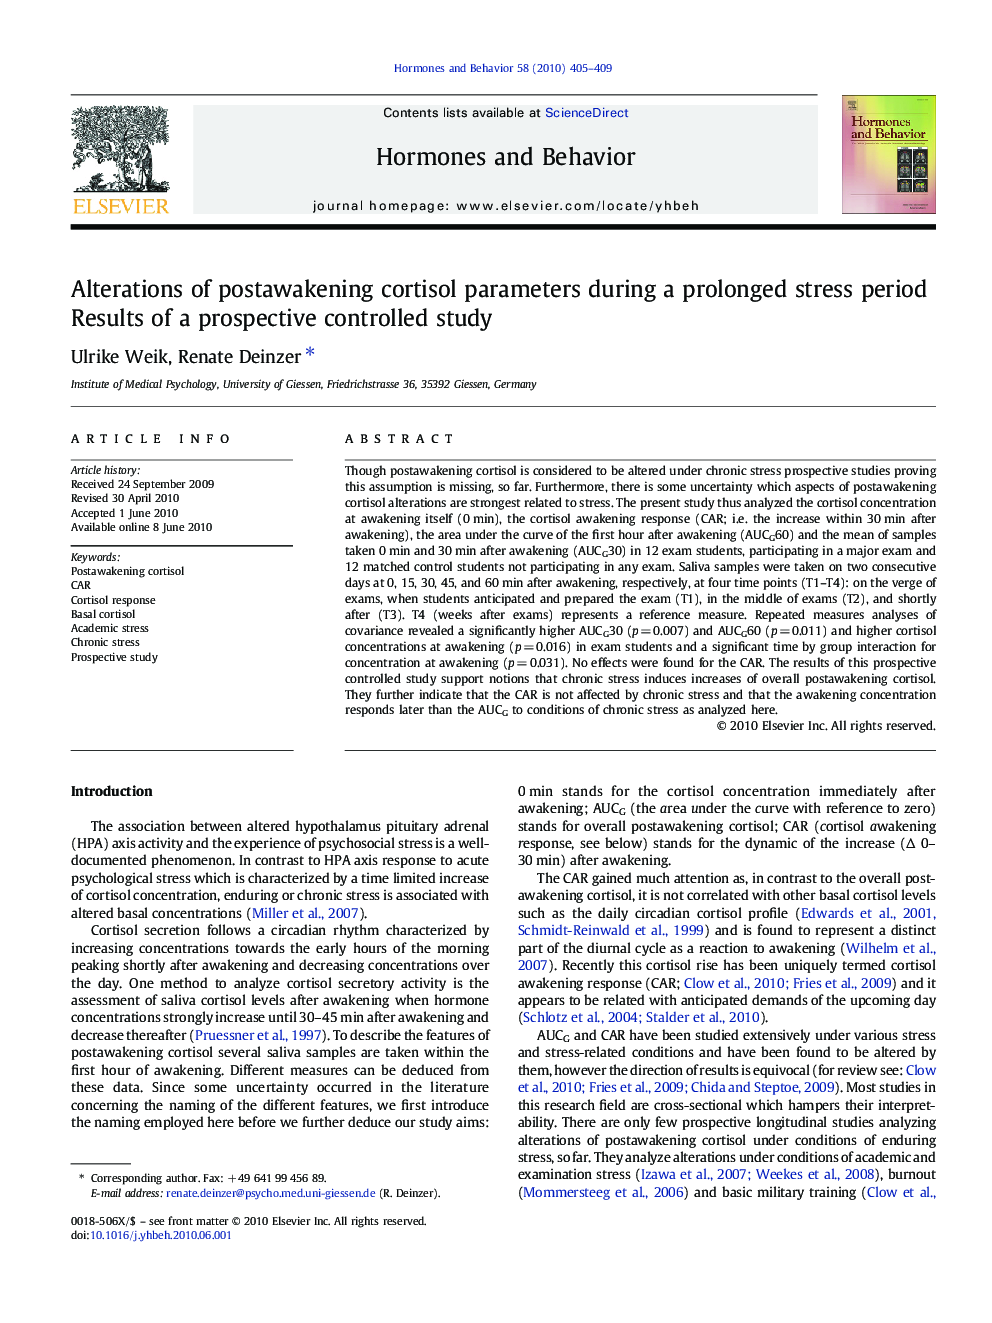 Alterations of postawakening cortisol parameters during a prolonged stress period: Results of a prospective controlled study